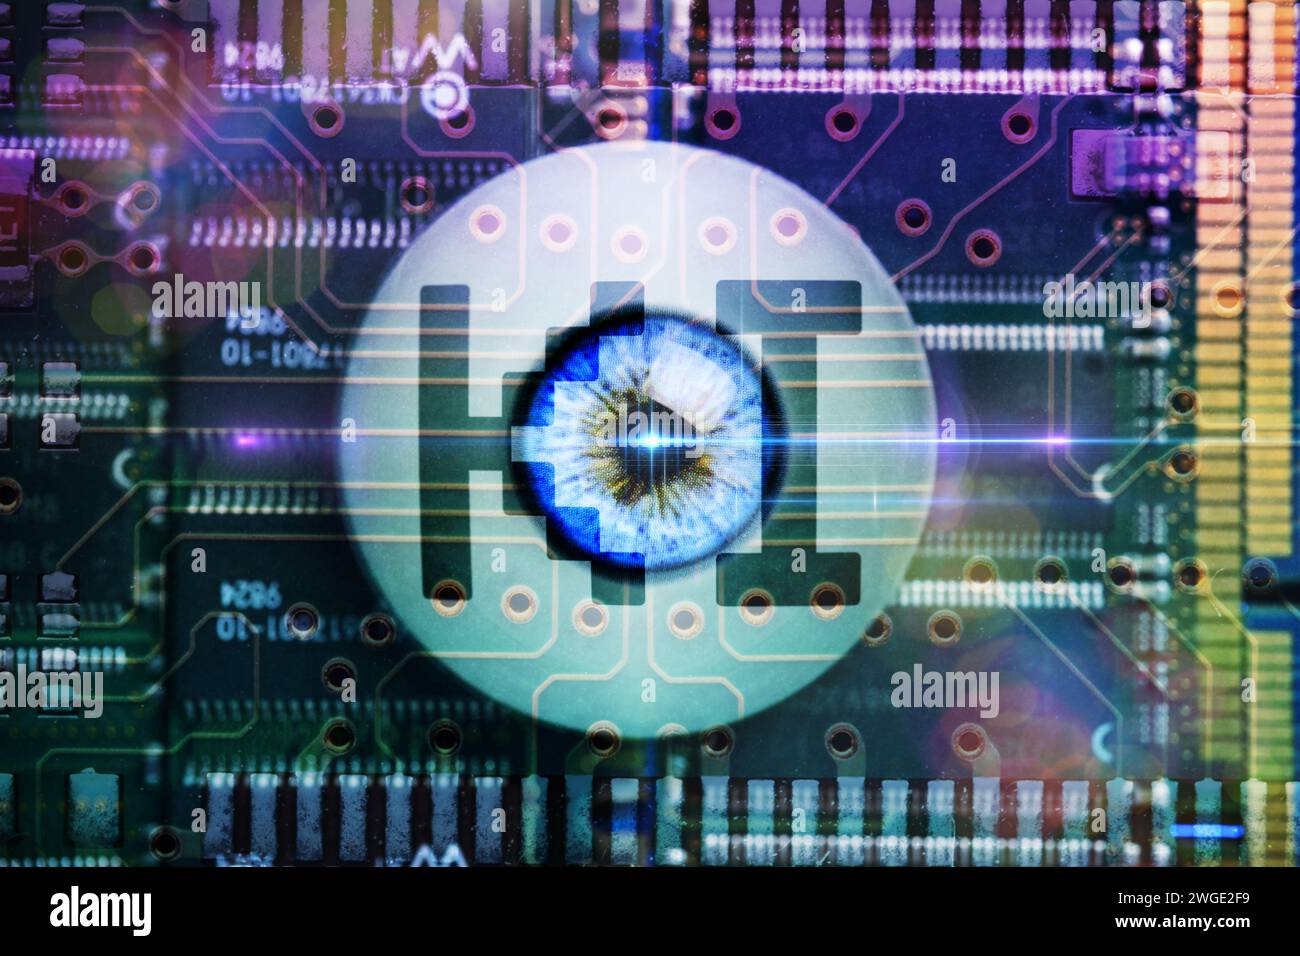 Artificial Eye With Inscription AI Is Located On Computer Board, Symbol Photo Artificial Intelligence, Deep Learning, Photomontage Stock Photo